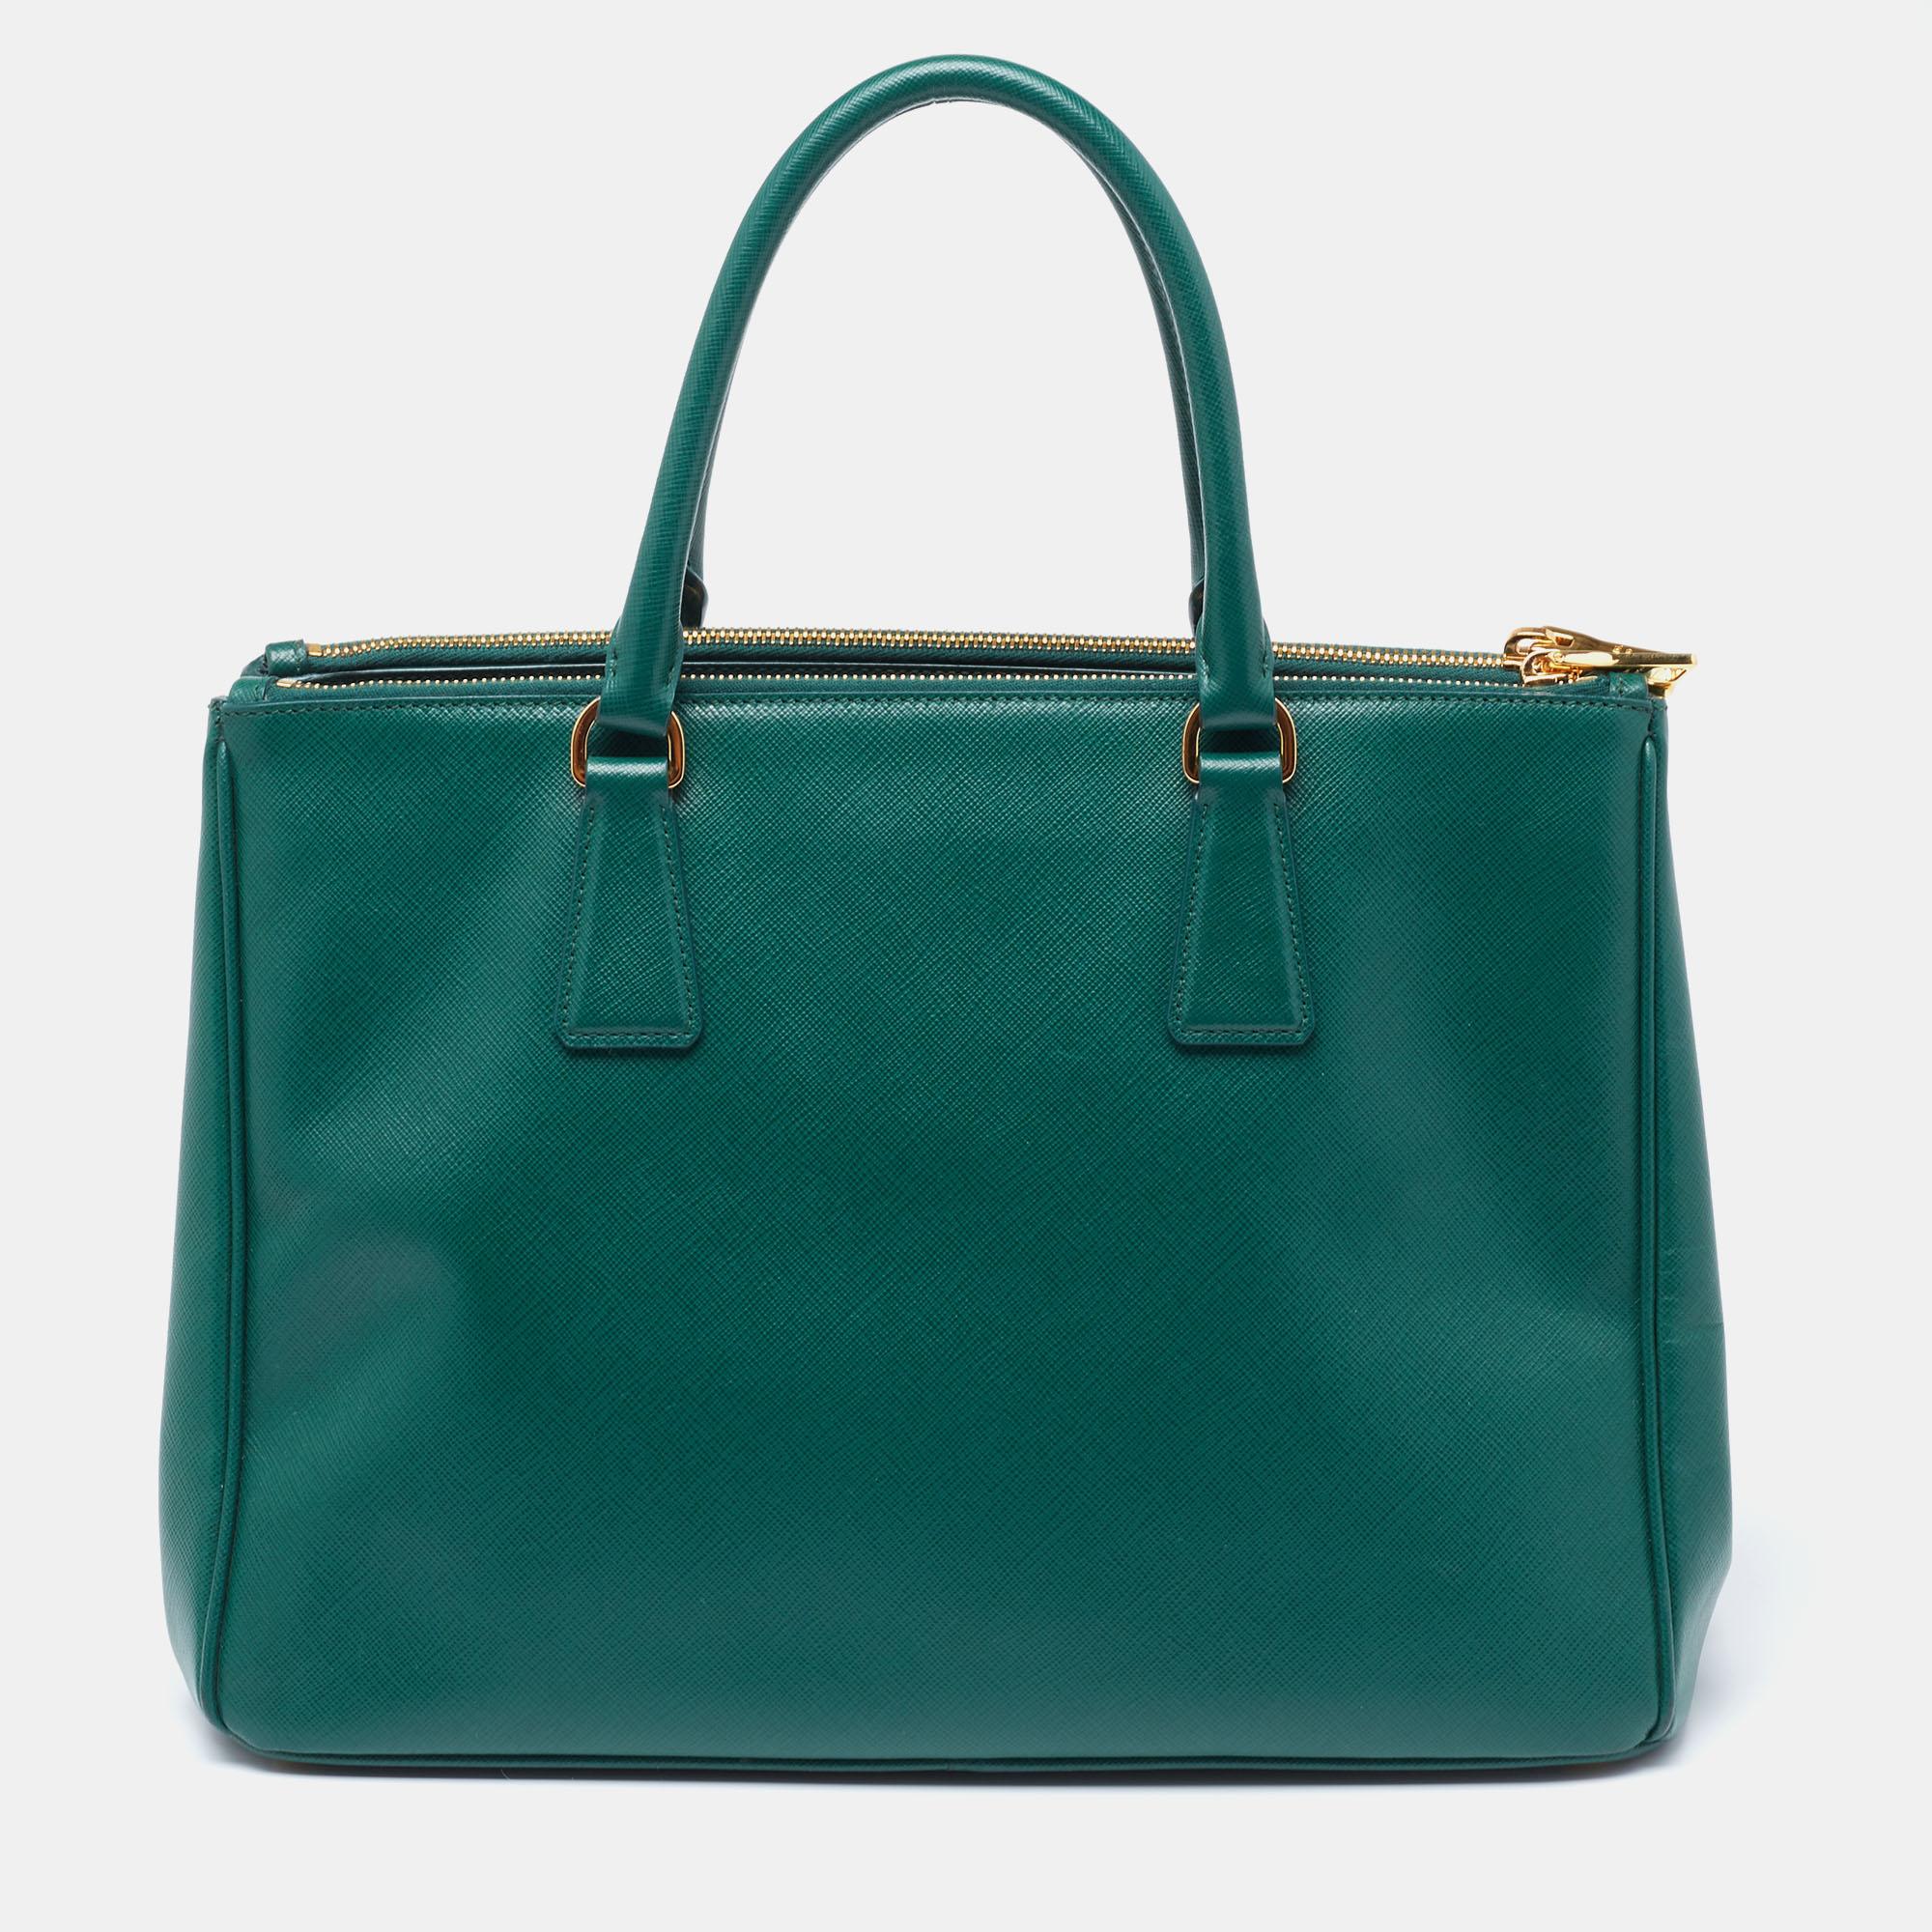 Feminine in shape and grand in design, this double zip tote by Prada will be a loved addition to your closet. It has been crafted from leather and styled minimally with gold-tone hardware. It comes with dual top handles, two zip compartments, and a